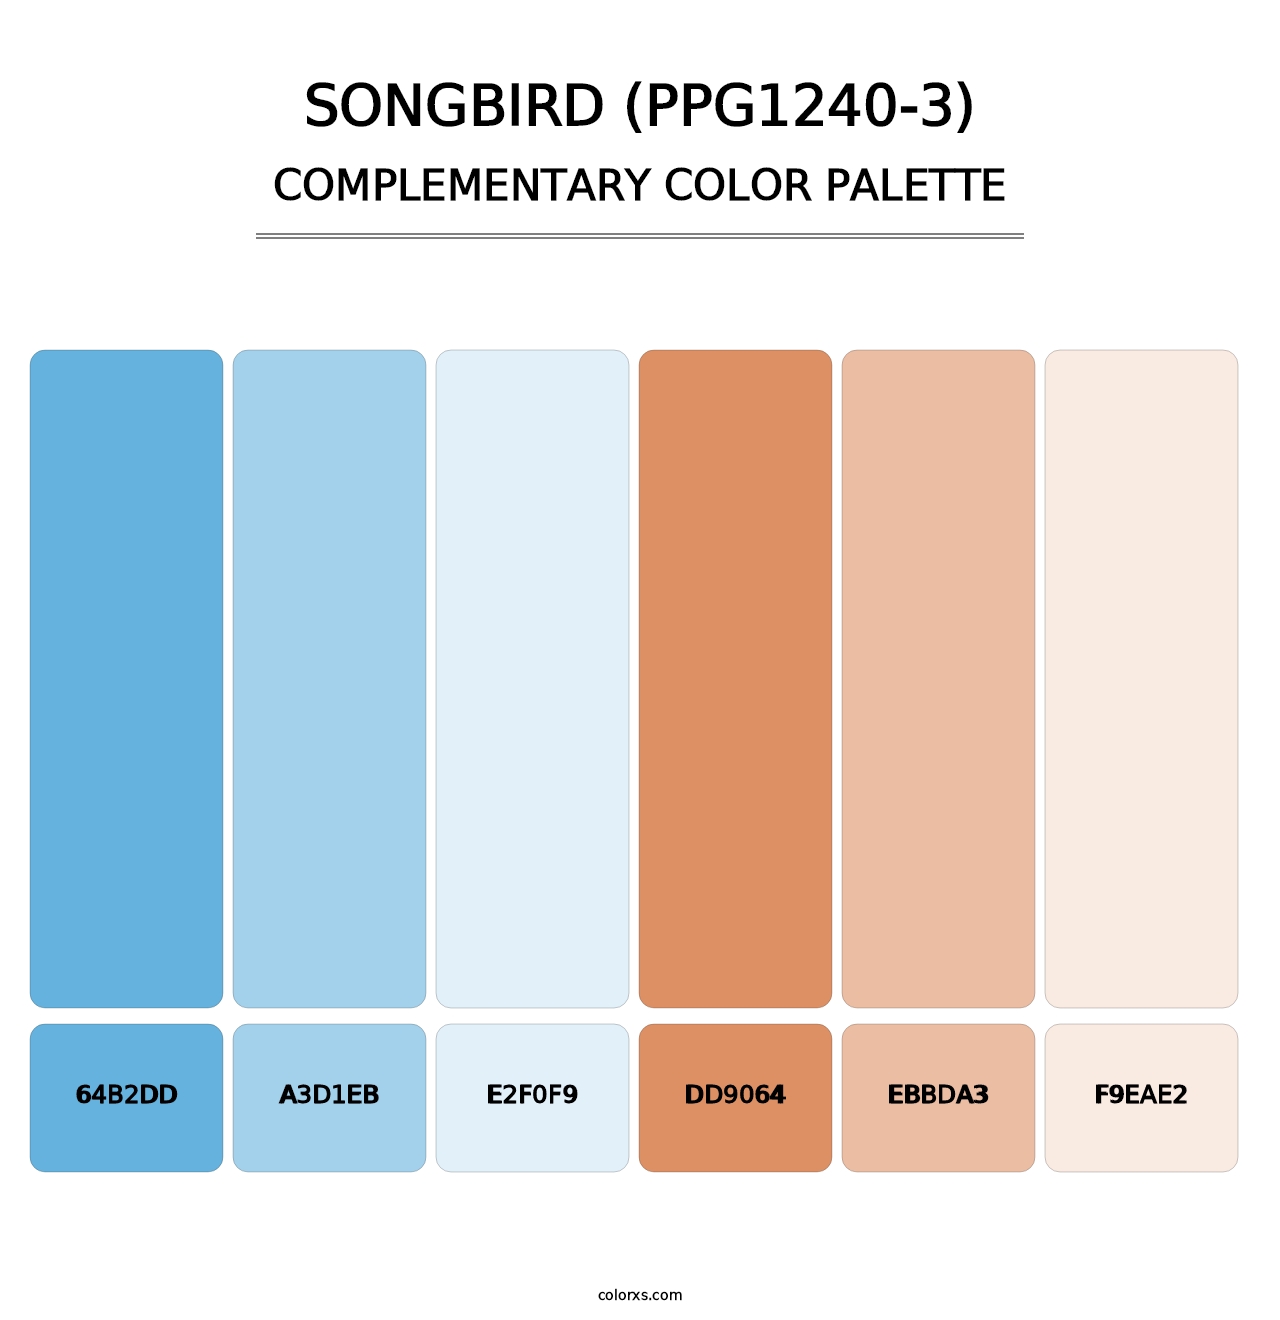 Songbird (PPG1240-3) - Complementary Color Palette